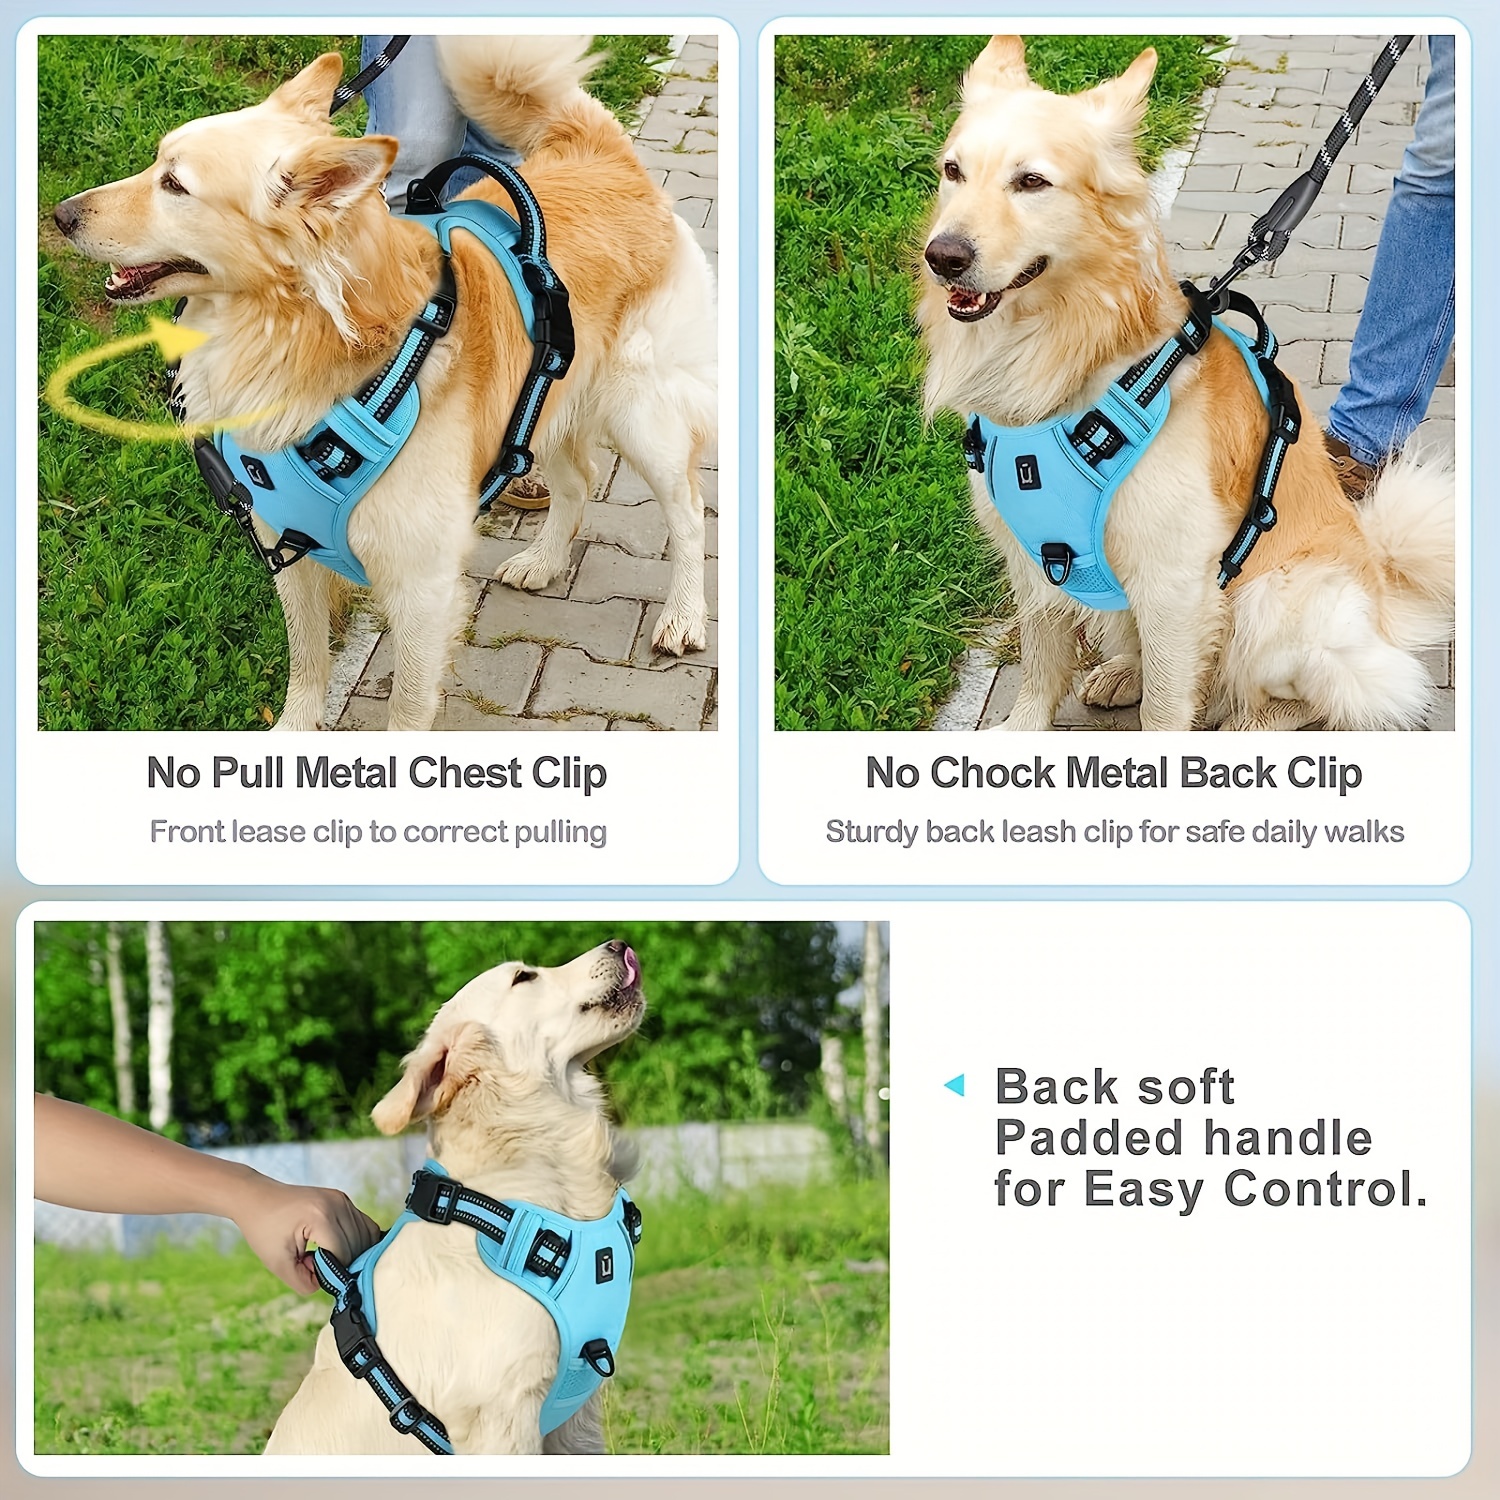 Auroth Tactical Dog Harness Adjustable Metal Buckles Dog Vest with Handle, No Pulling Front Leash Clip - Gray Blue Camouflage / X-Large